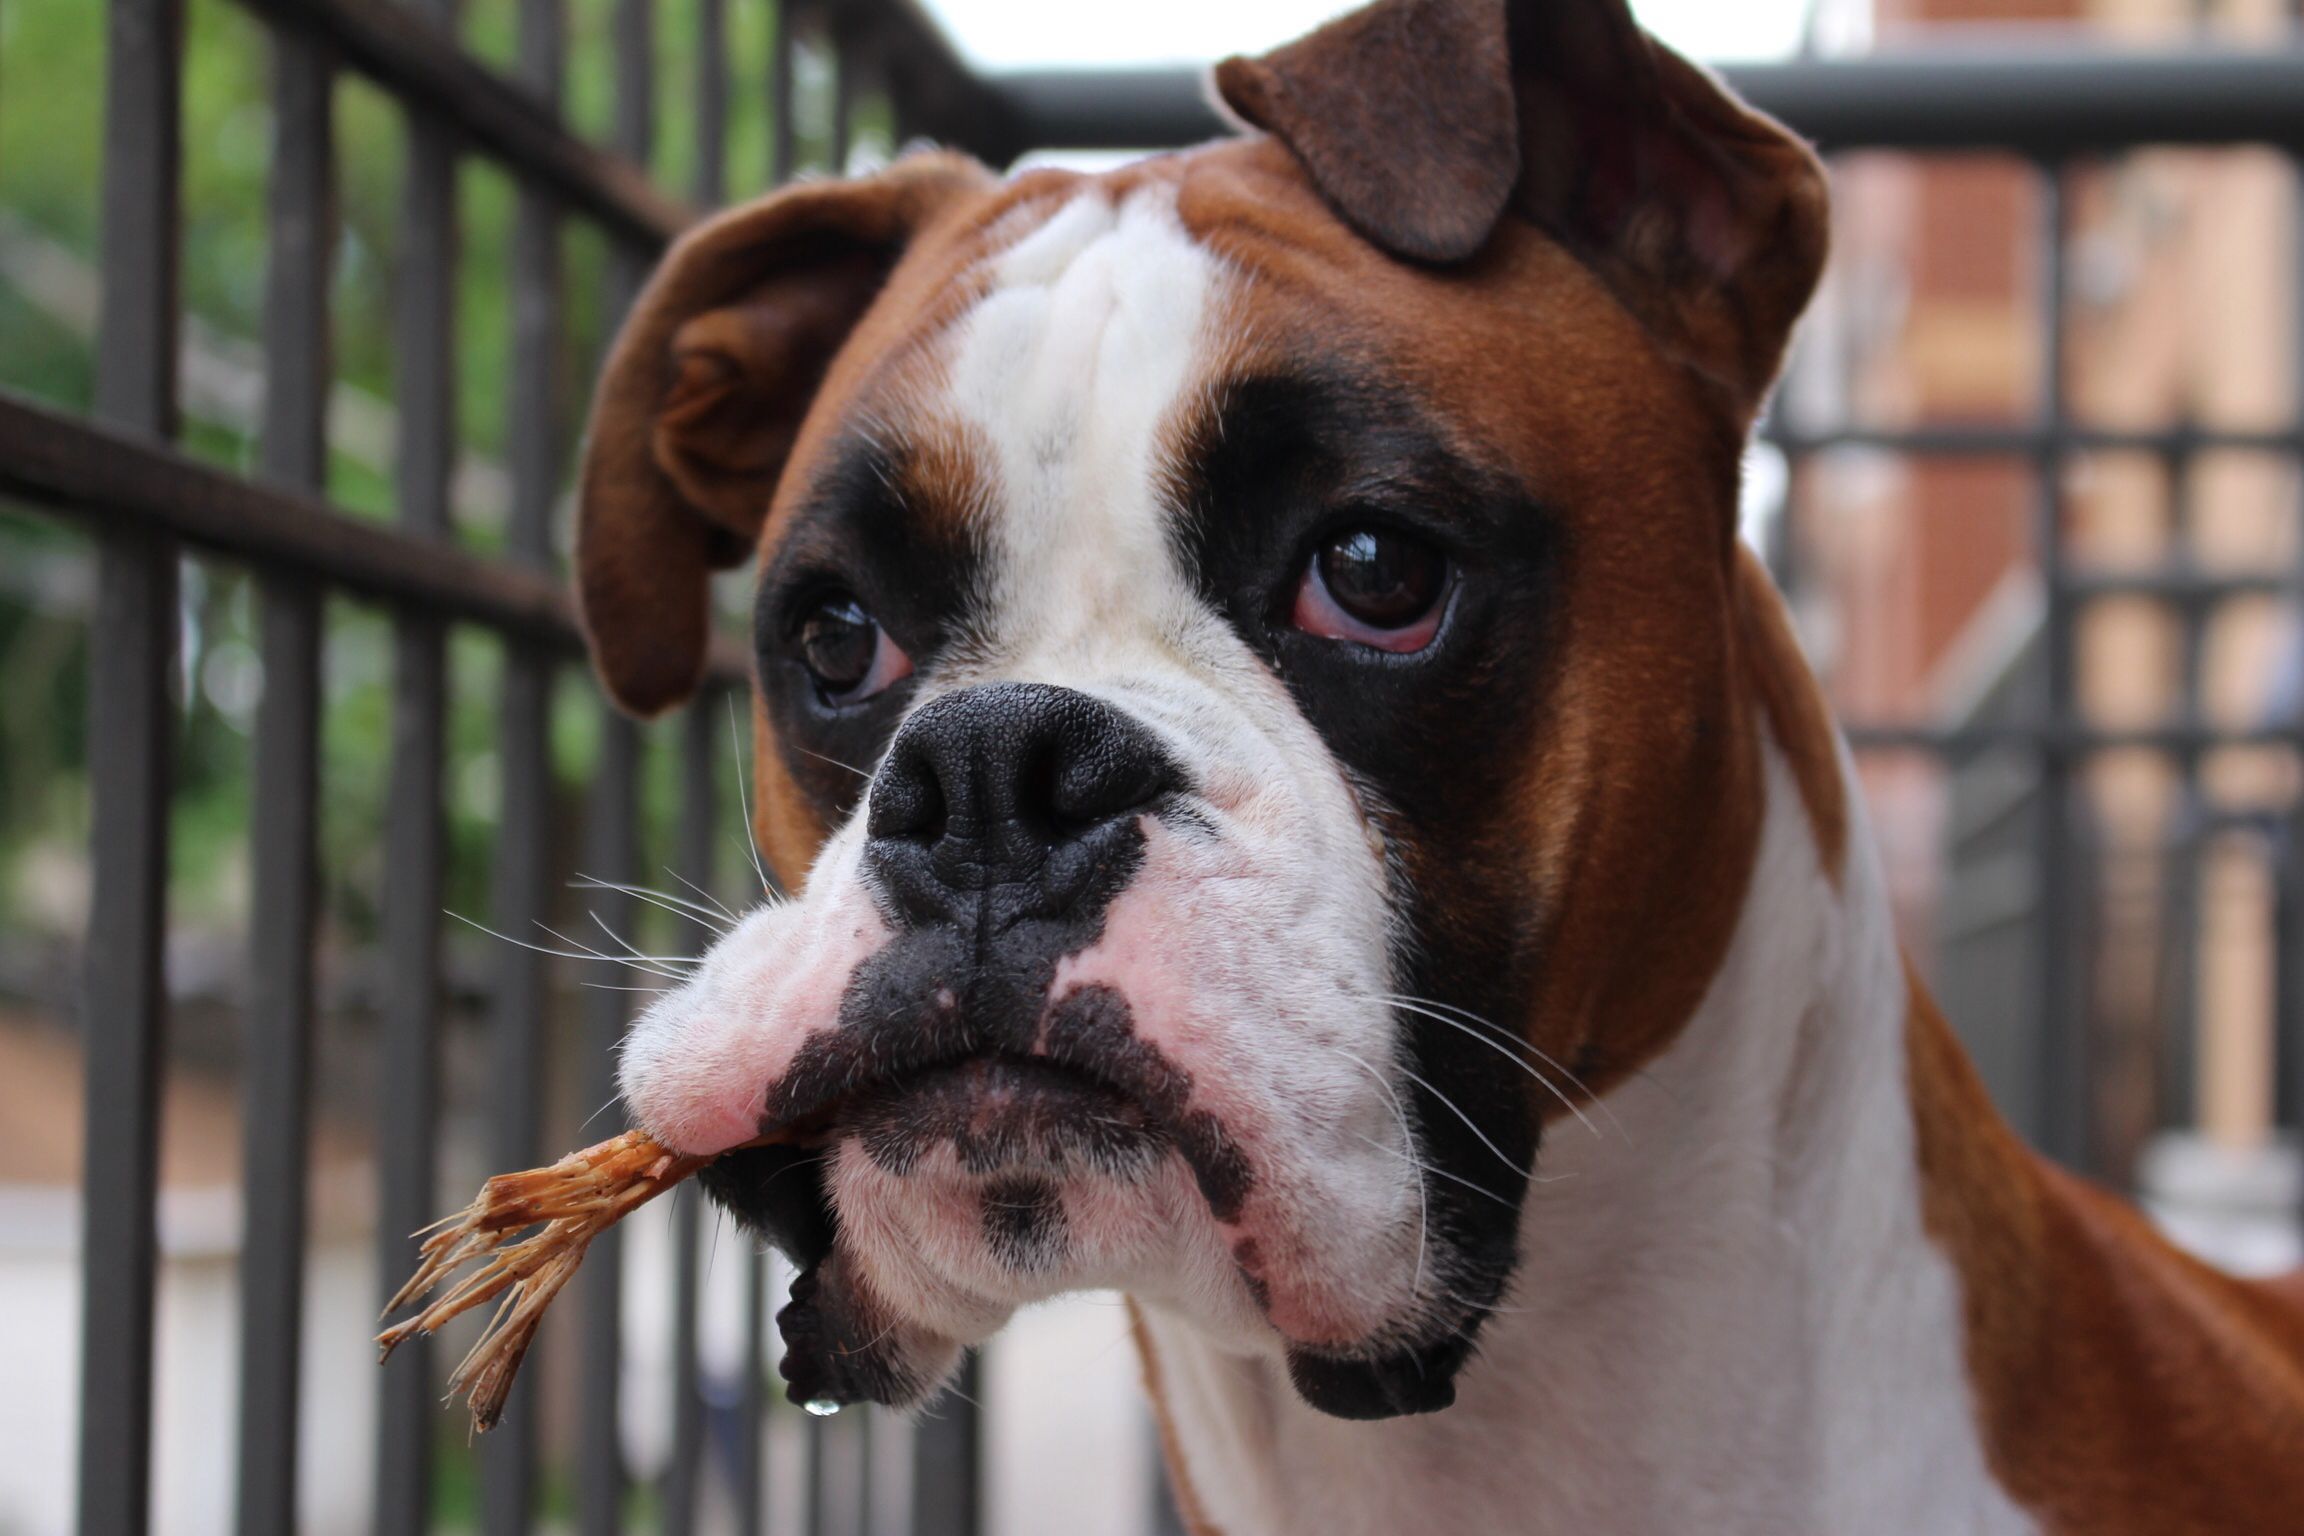 Boxer Dog standing behind the gate with a branch in its mouth